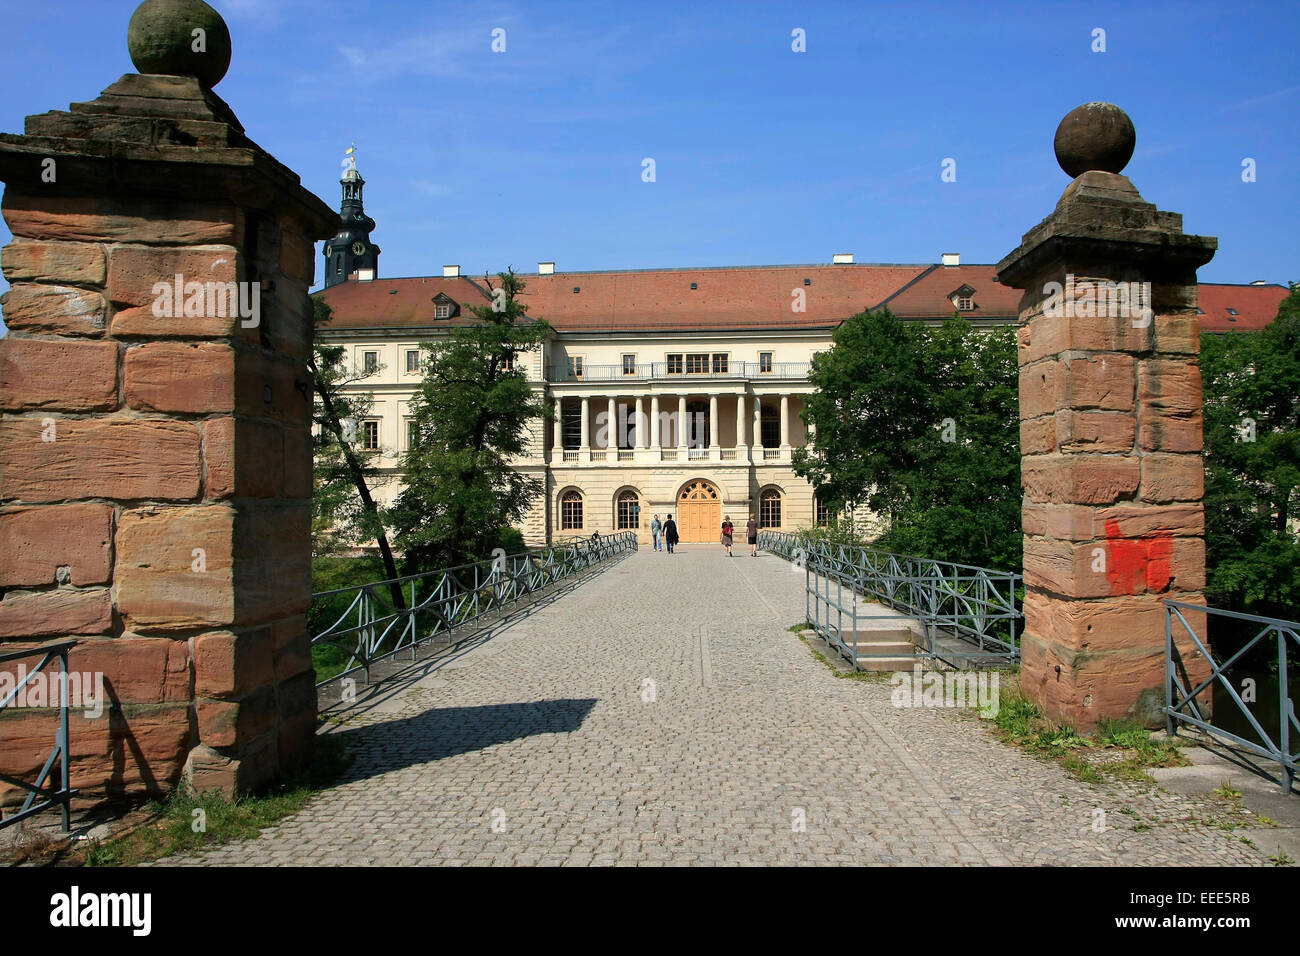 The star bridge in Weimar. The star bridge (Sternenbruecke) was built in 1654 and the city palace built 1789 on the river Ilm. In the museum castle there is an art collection of the Weimar dukes. Photo: July 26, 2014 Stock Photo